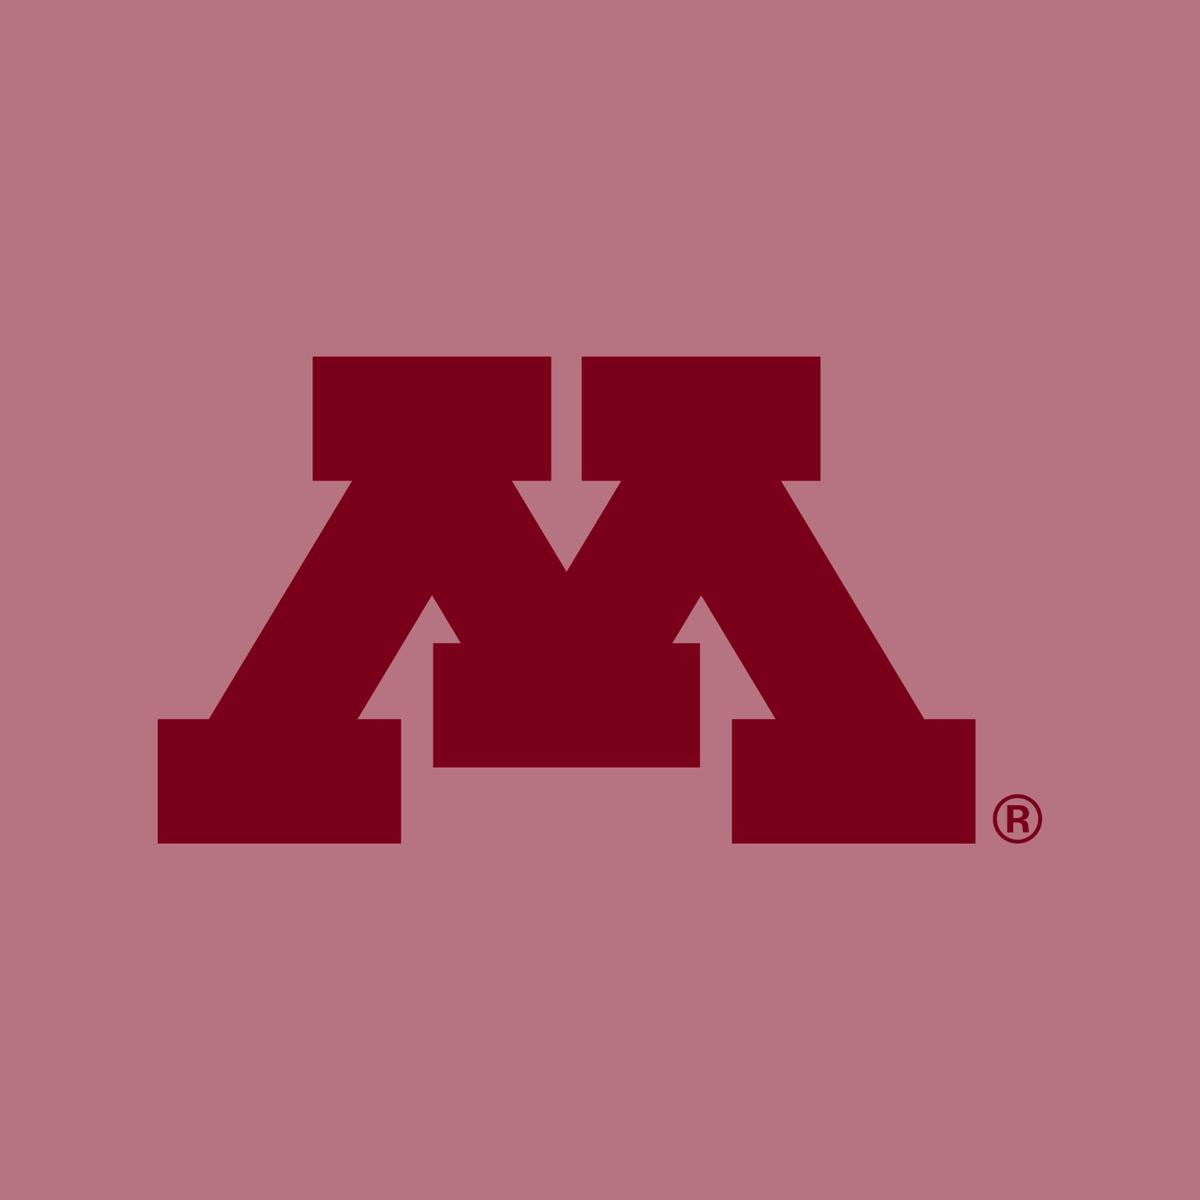 A U of M "M" logo in place of an image.